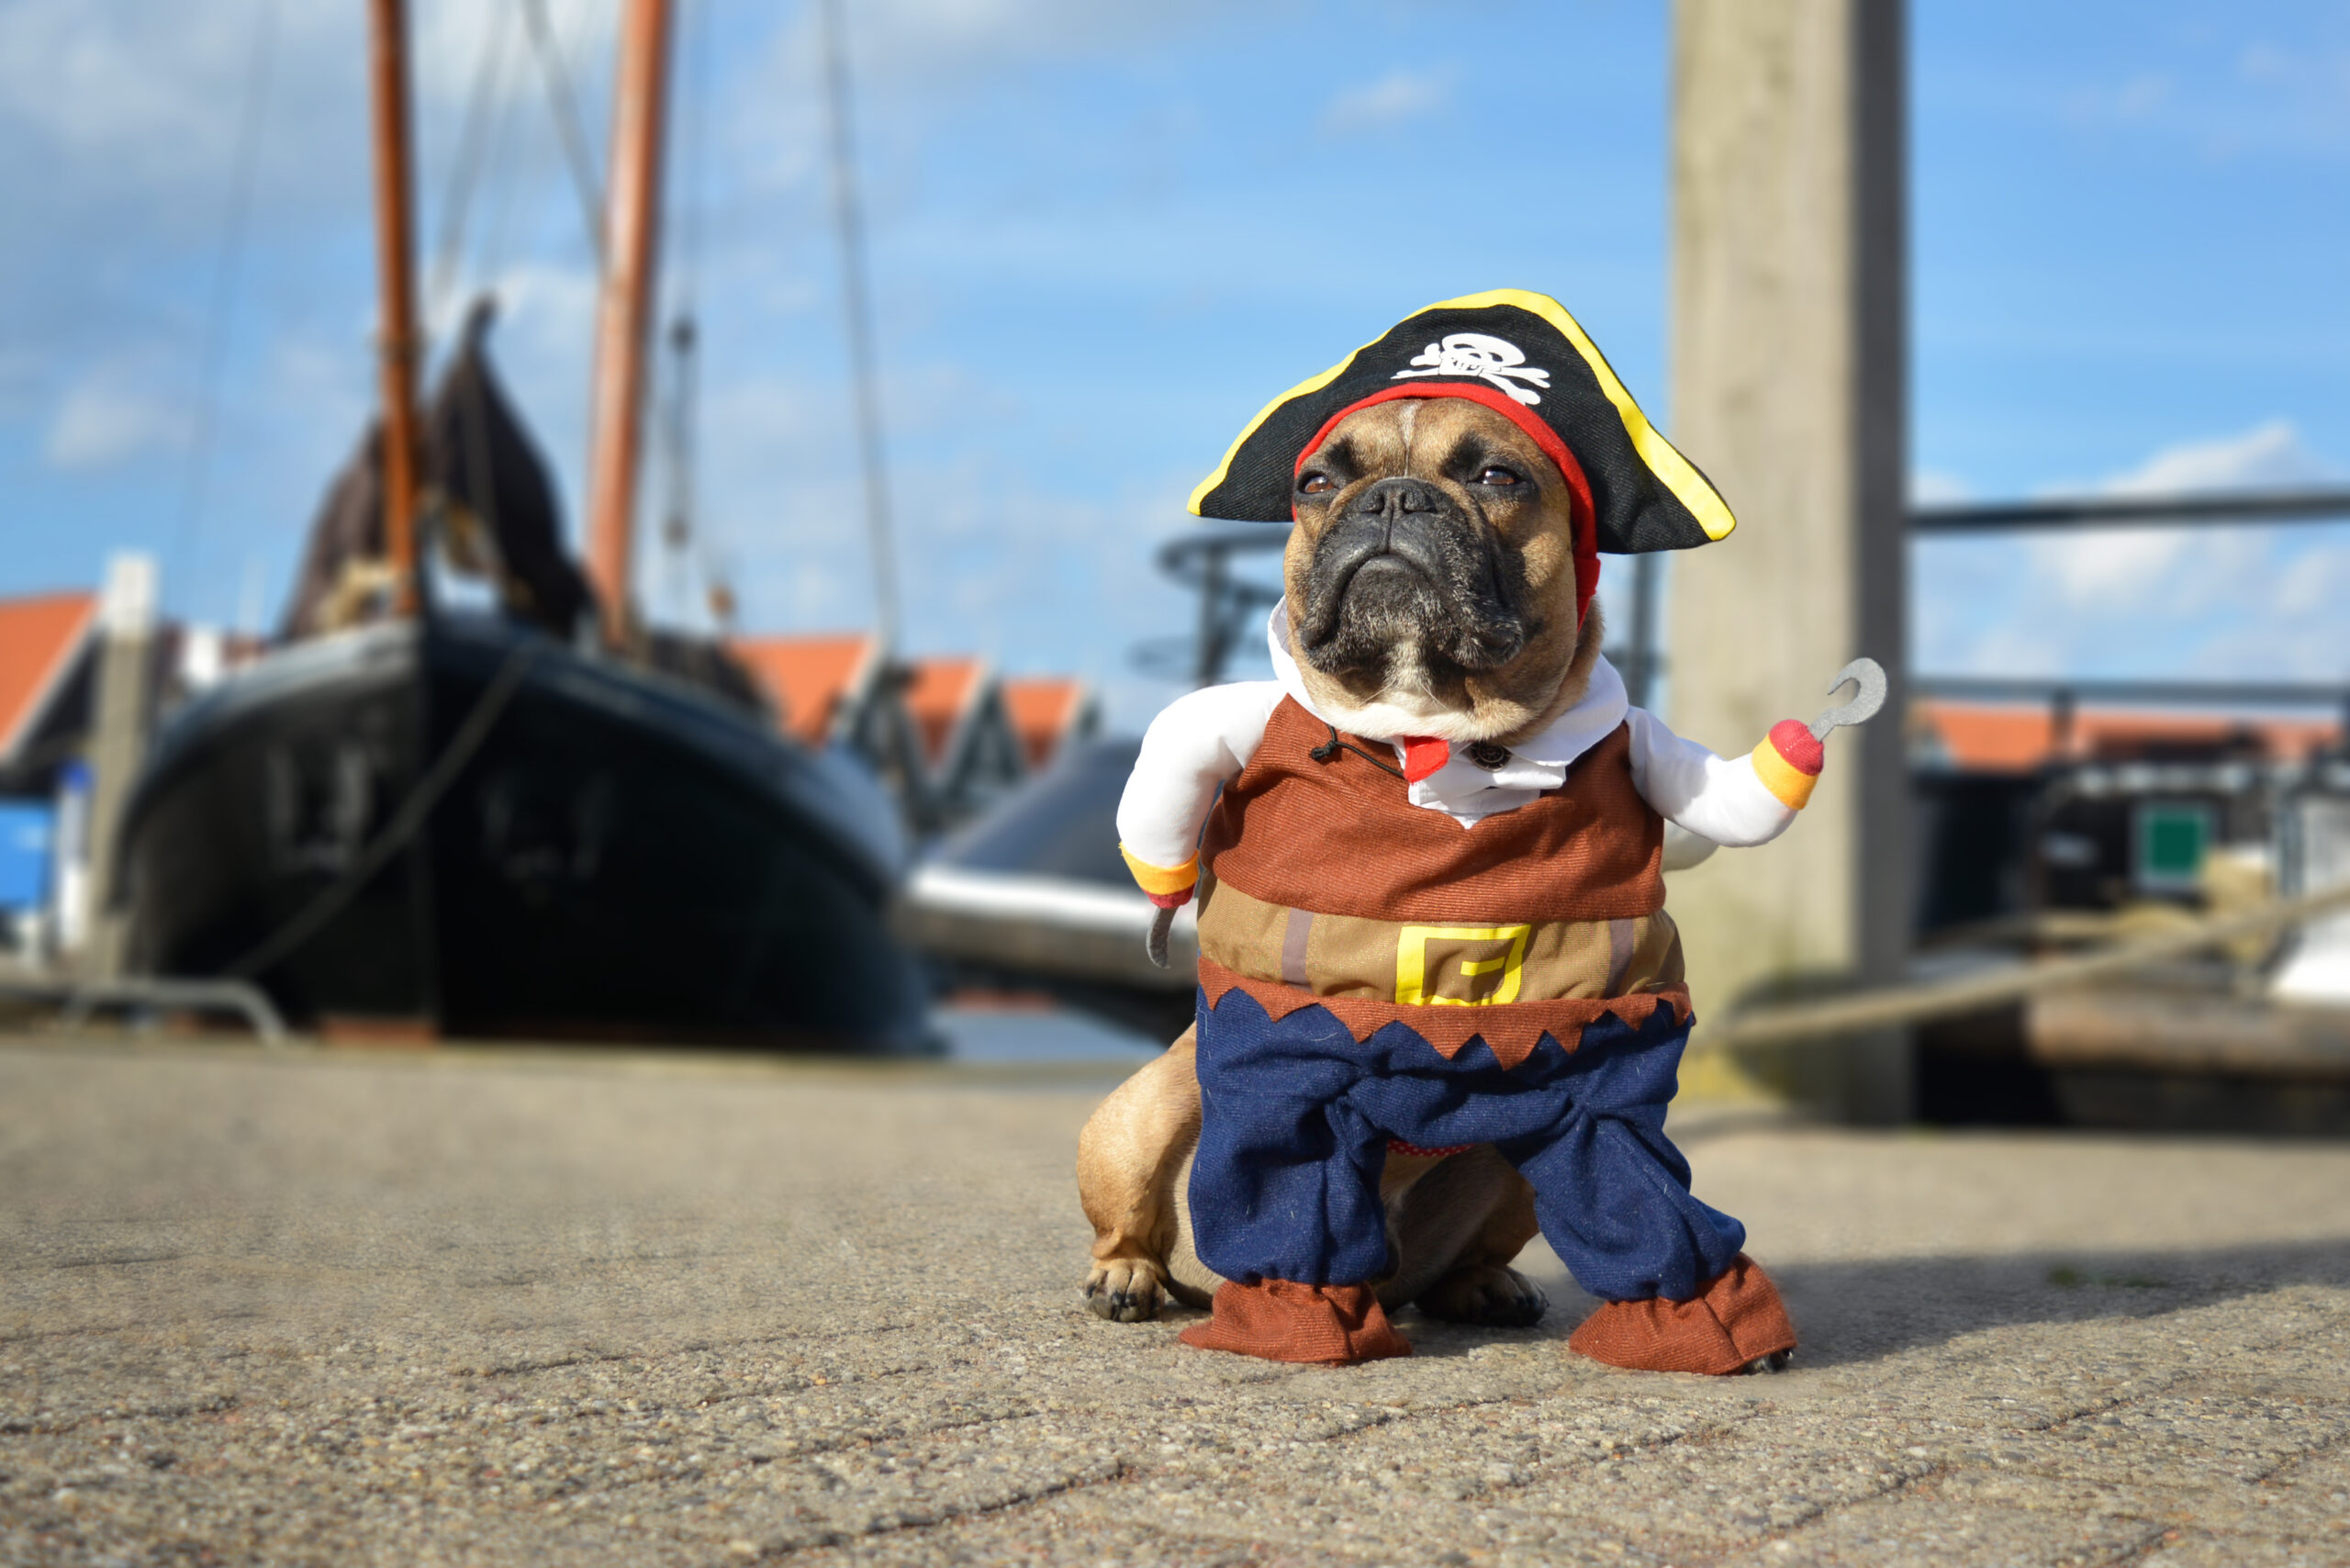 Halloween isn't just for humans anymore! Pet owners around the world have embraced the tradition of dressing up their dogs in adorable and creative costumes.